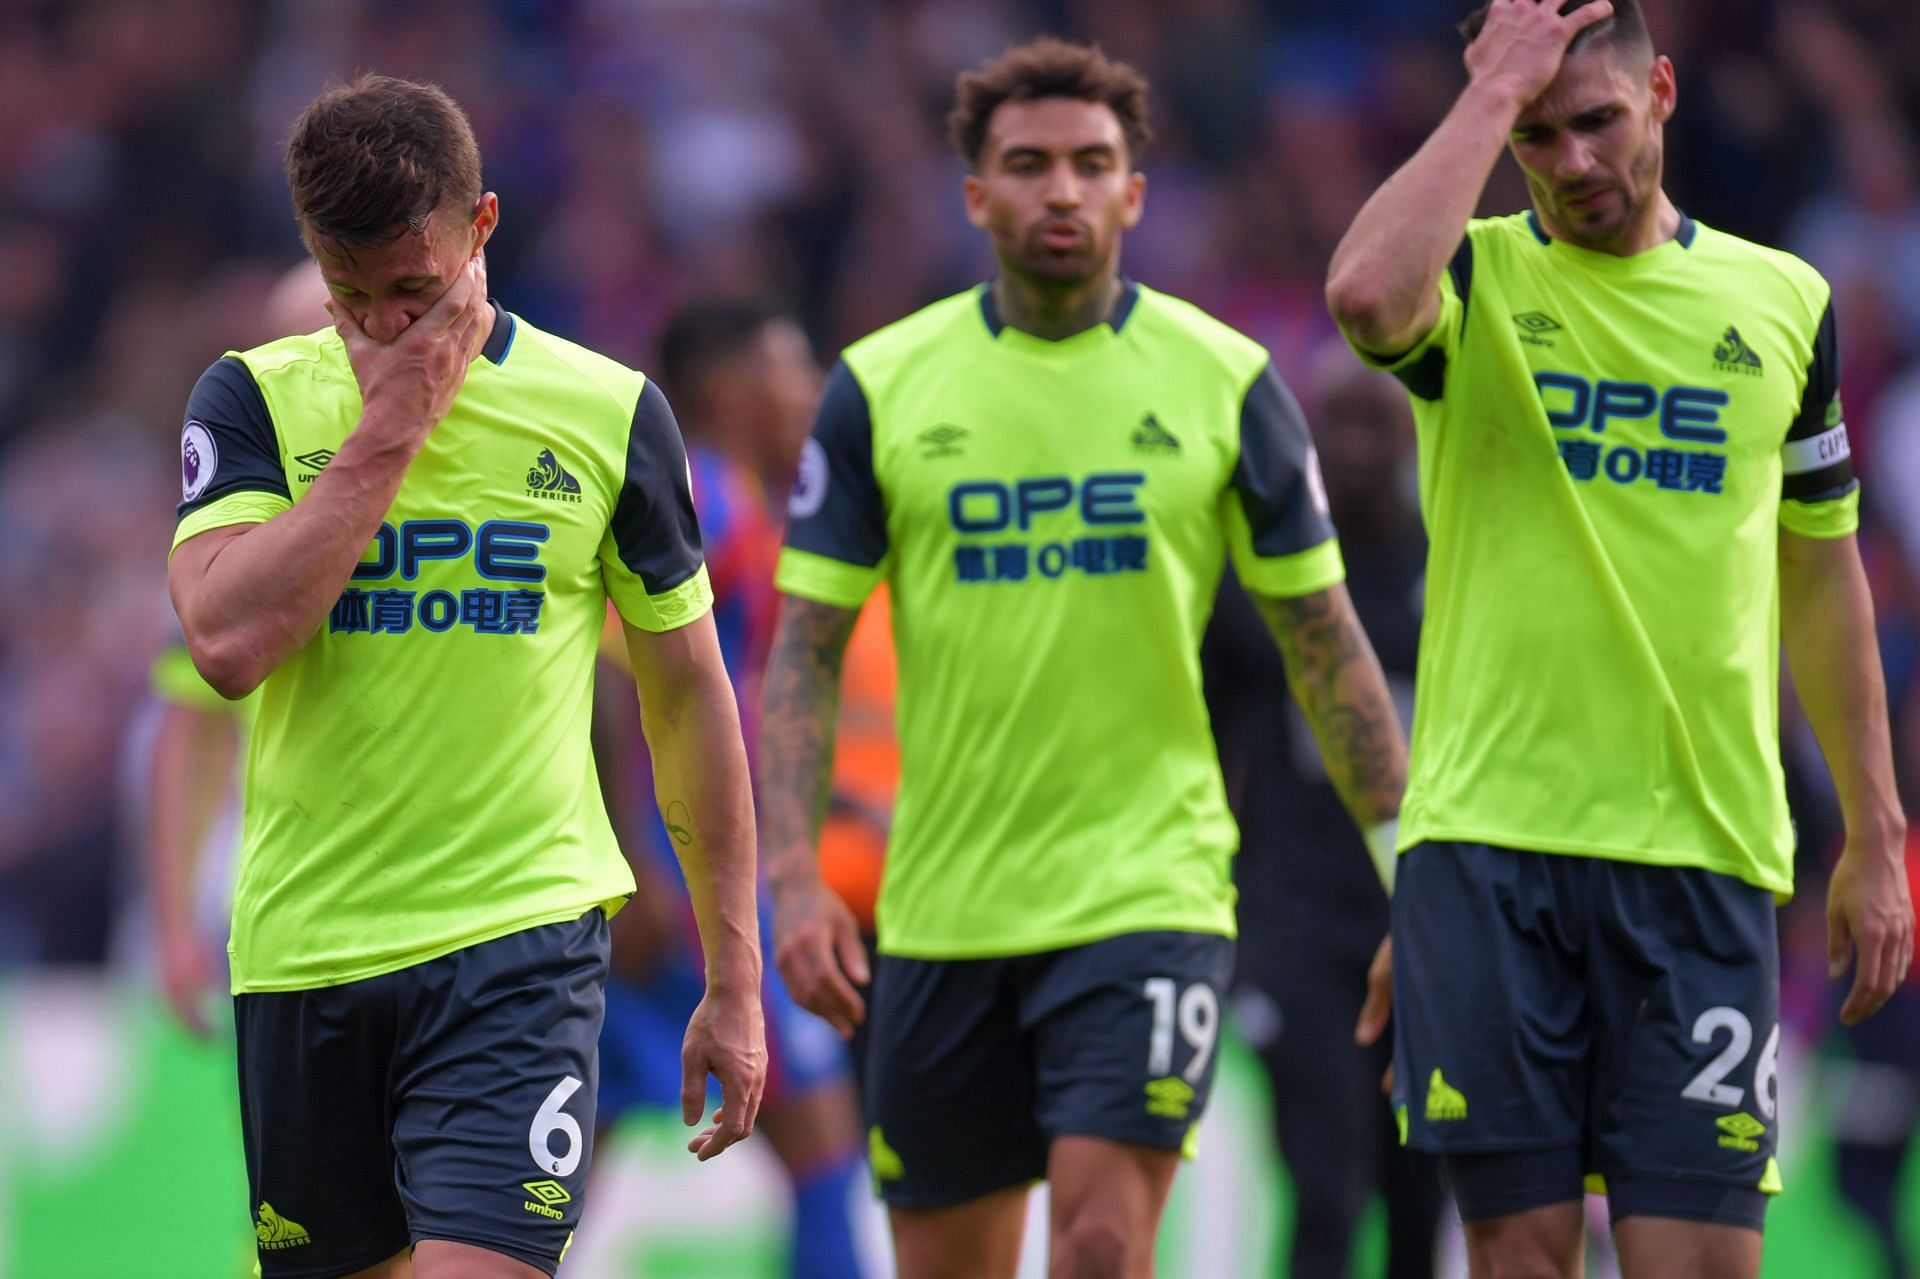 Huddersfield players react after losing to Crystal Palace